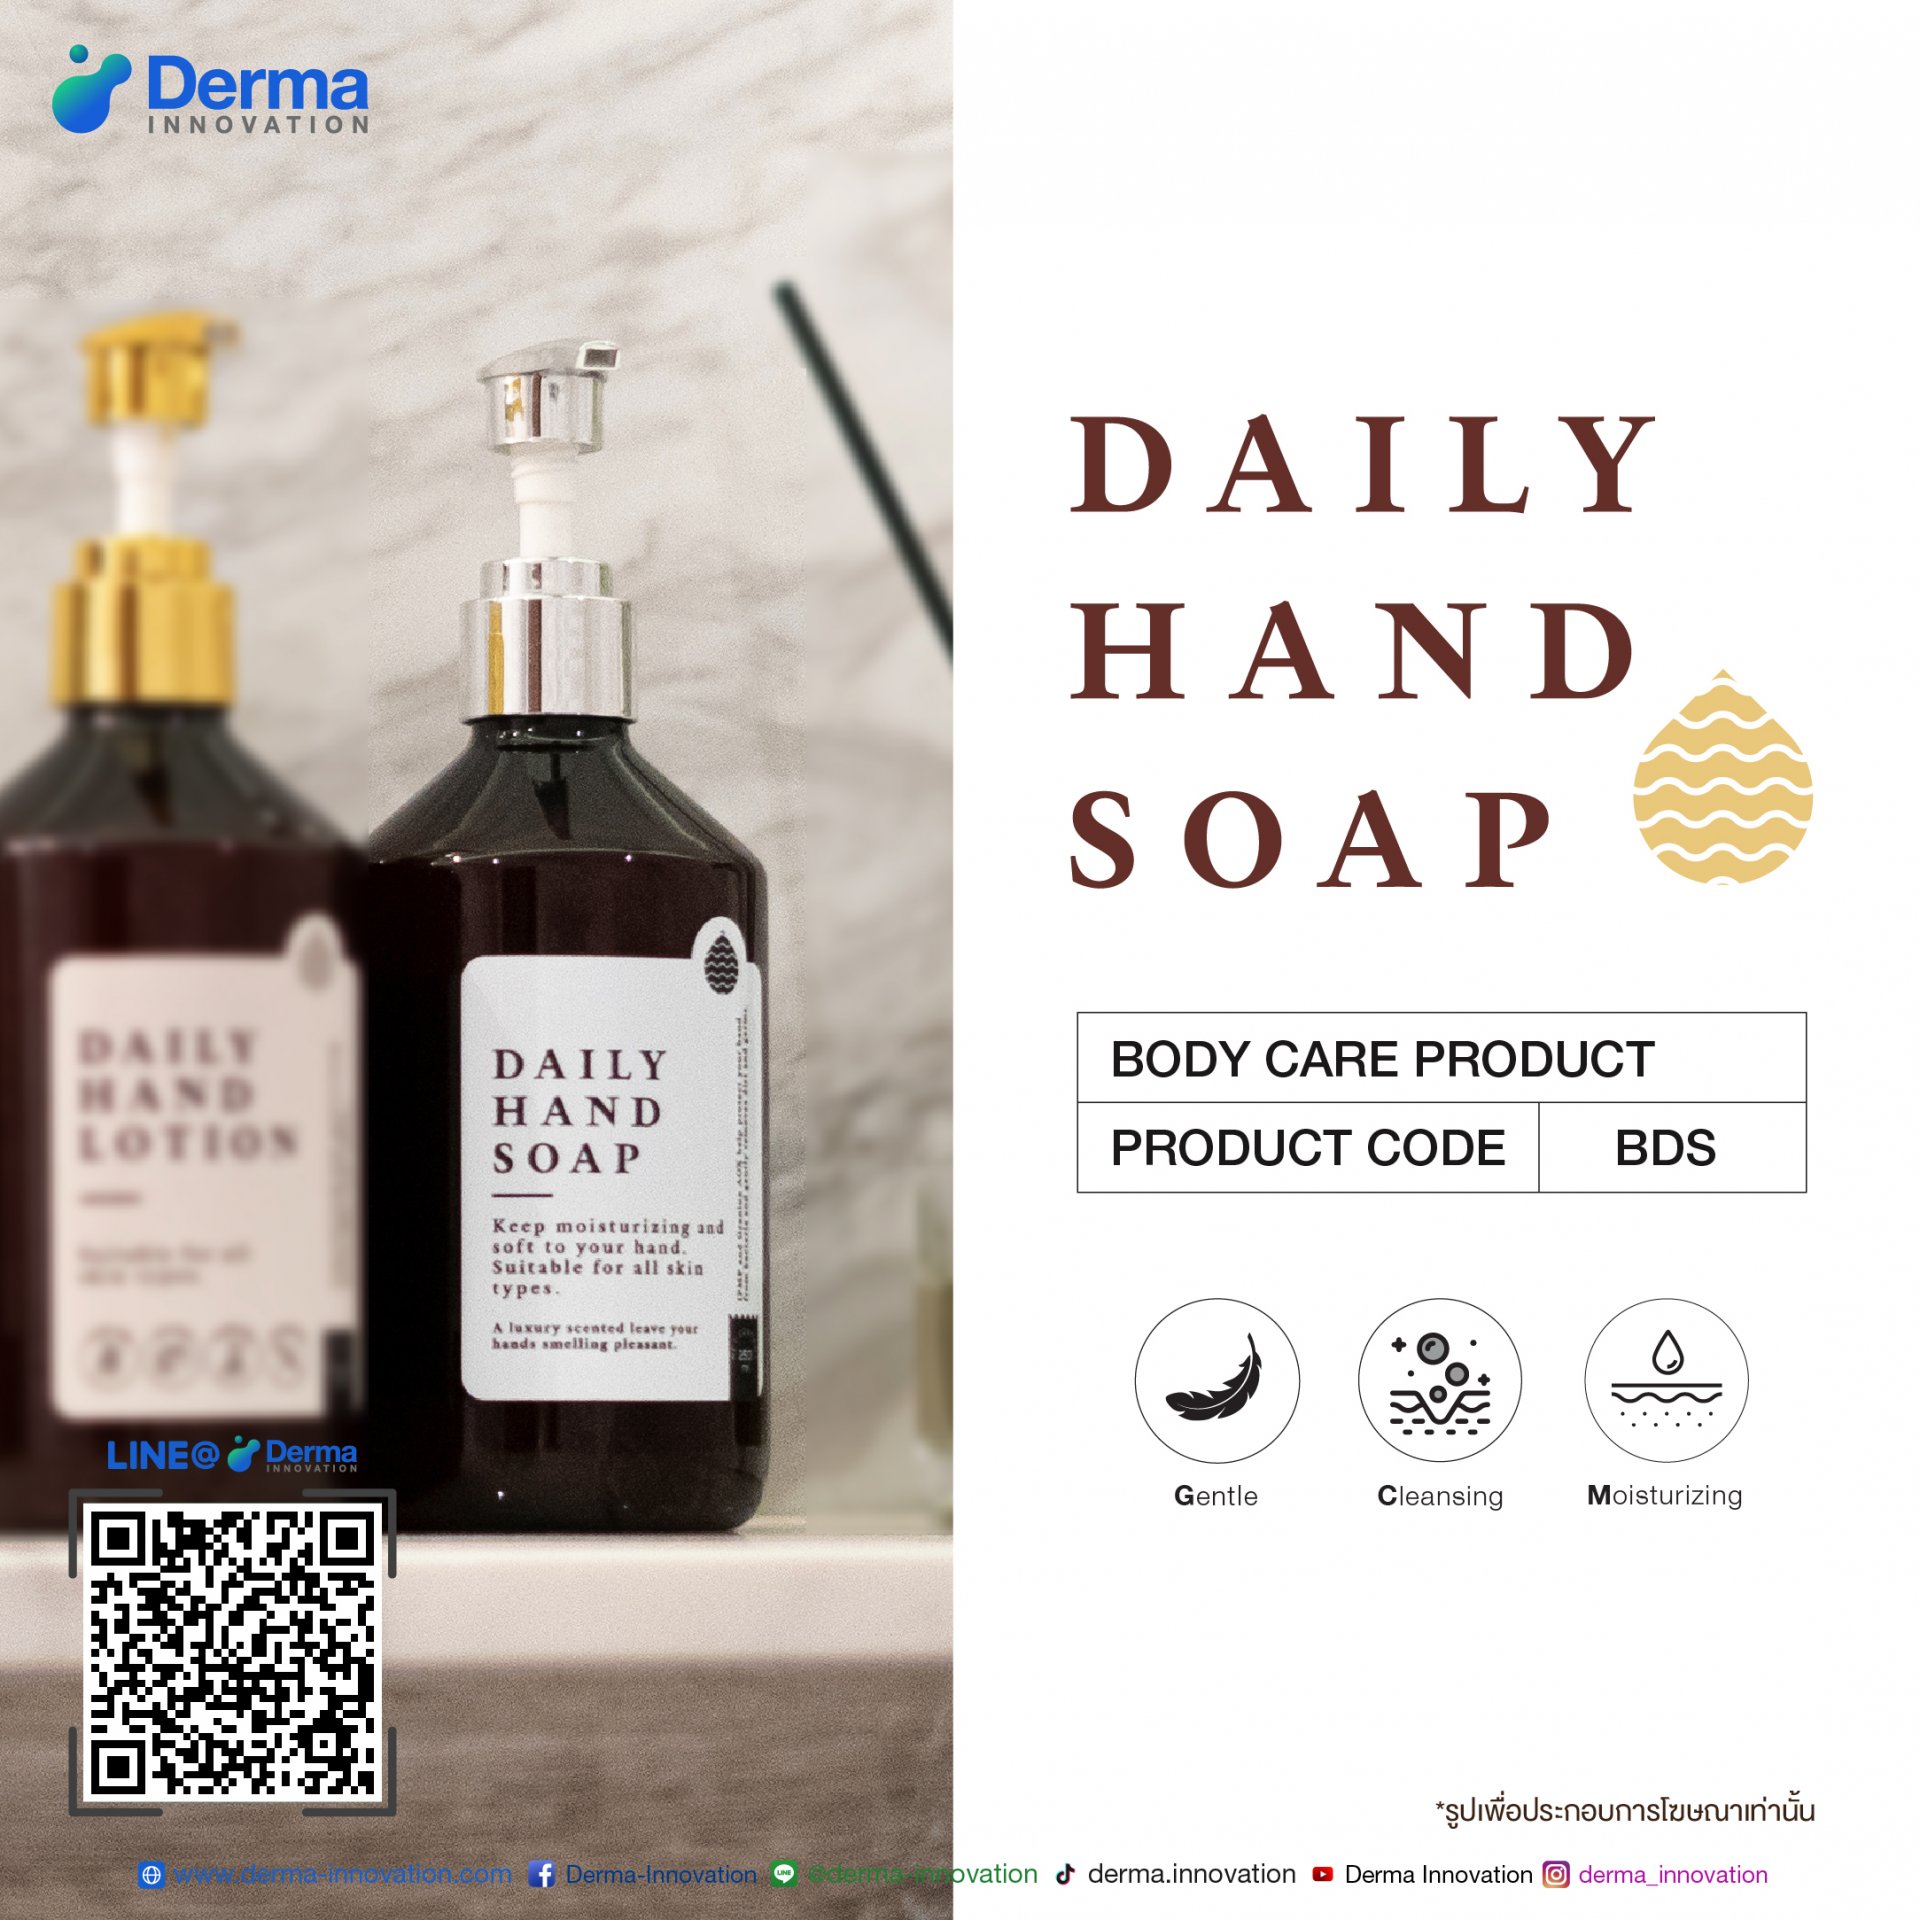 DAILY HAND SOAP